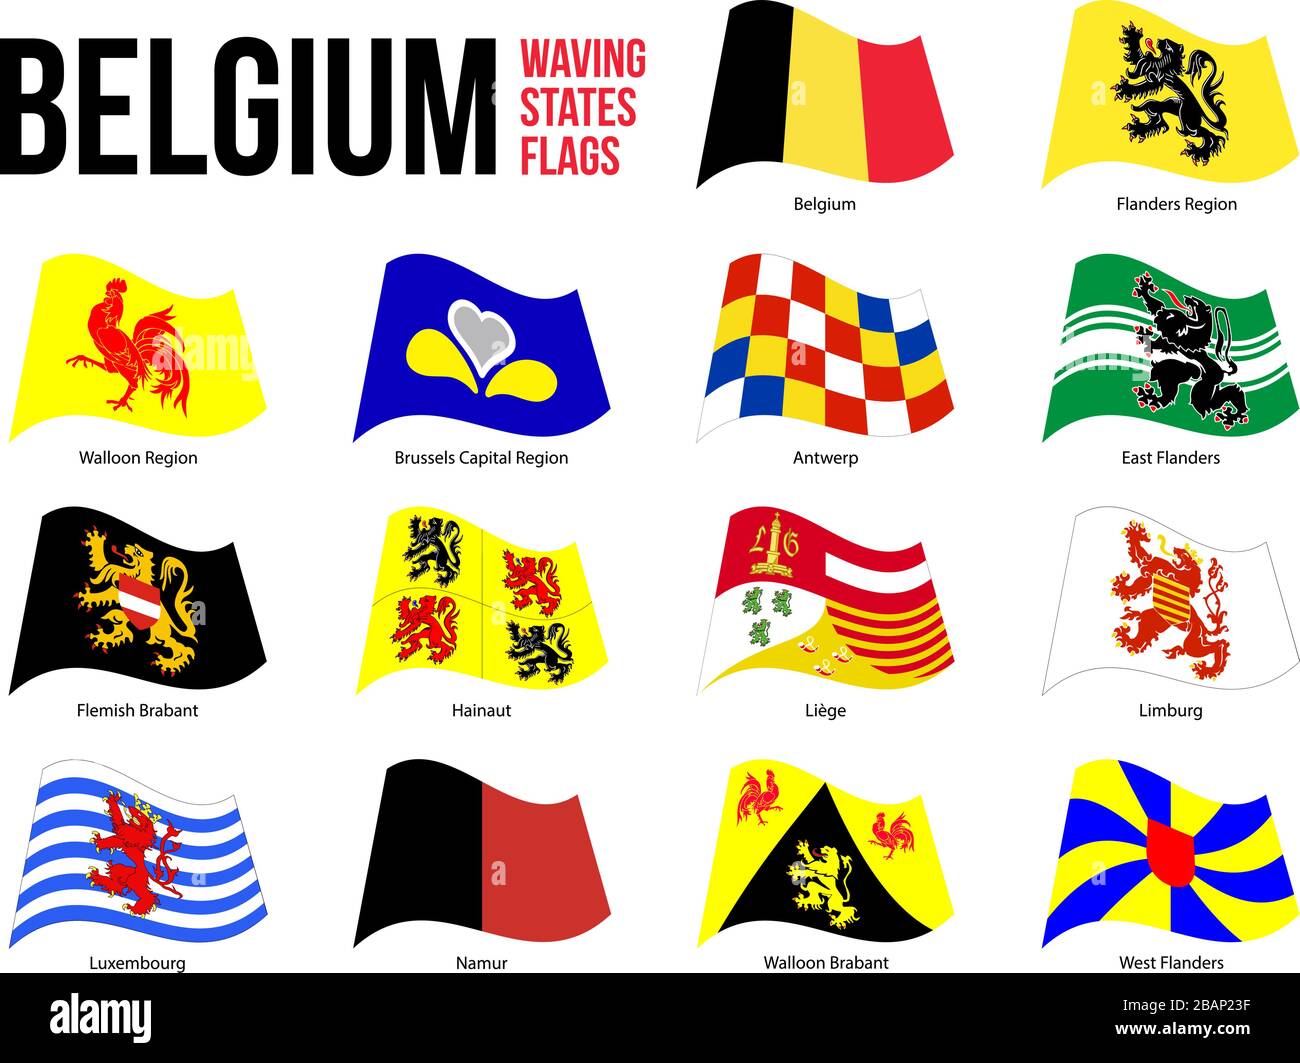 Belgium All Region & Provinces Flag Waving Vector Illustration on White Background. Flags of Belgium. Correct Size, Proportion and Colors. Stock Vector